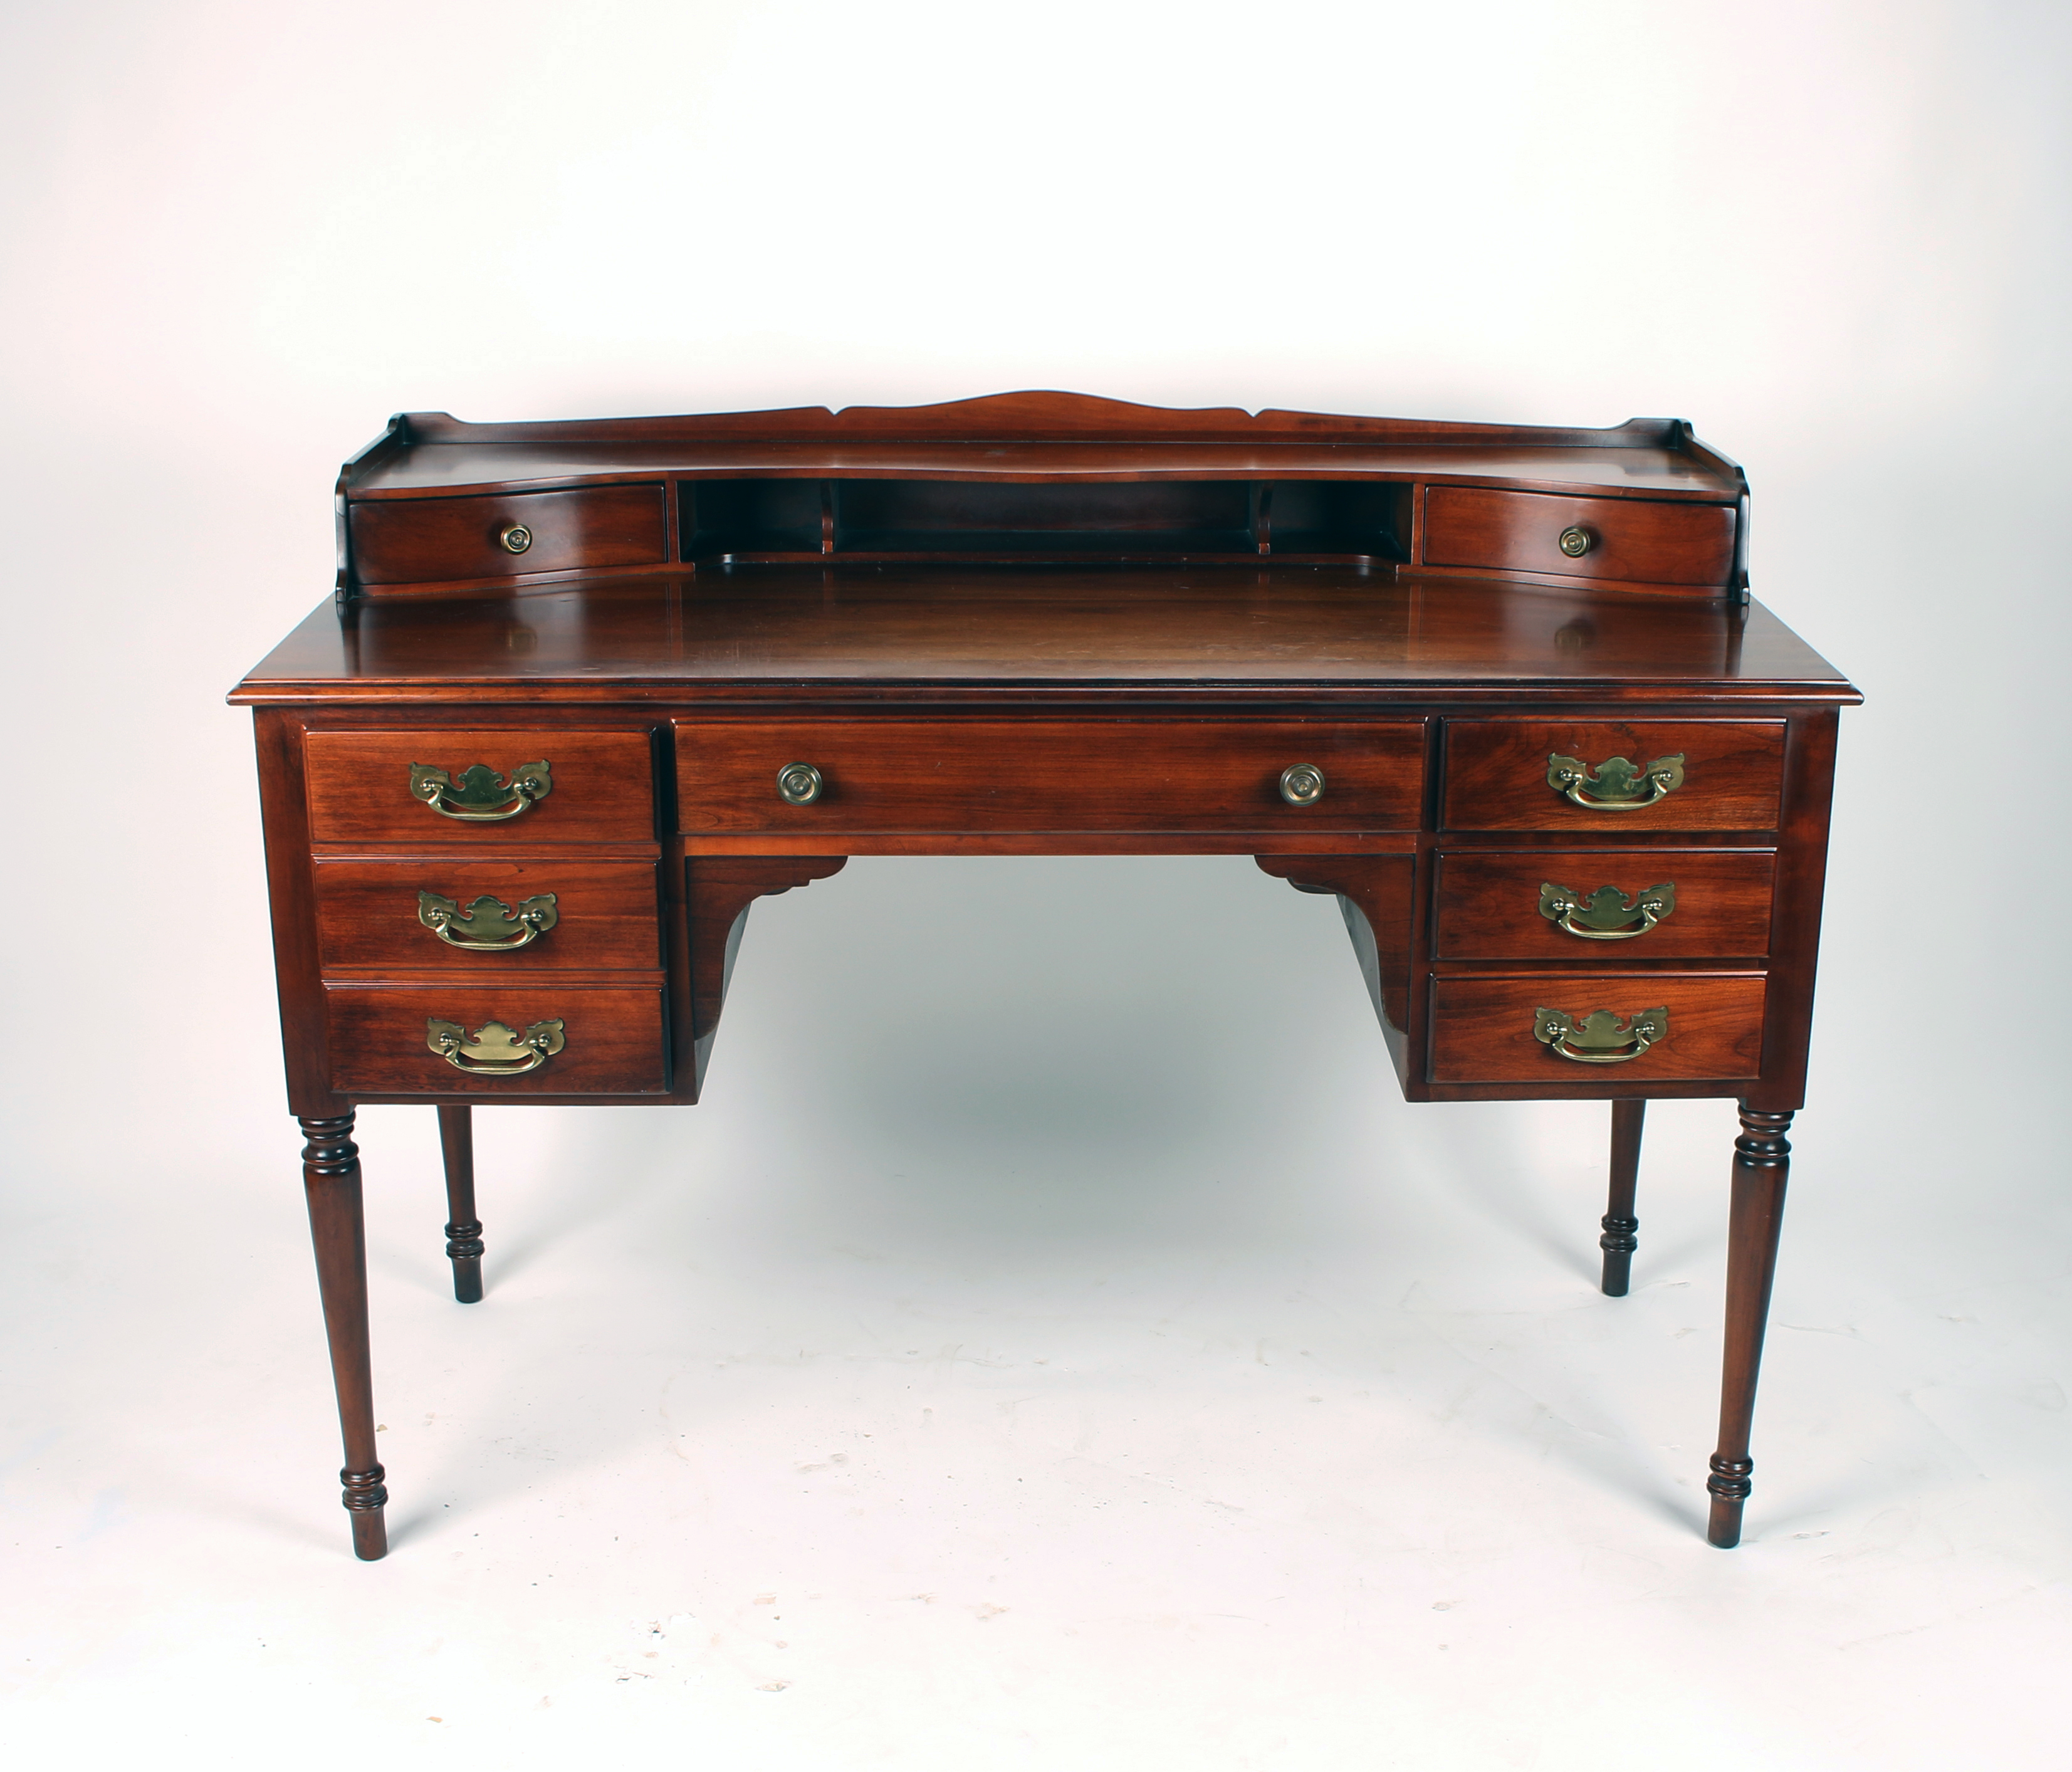 Elegant 1973 Old Towne Cherry Wood Desk With Brass Accents image 1